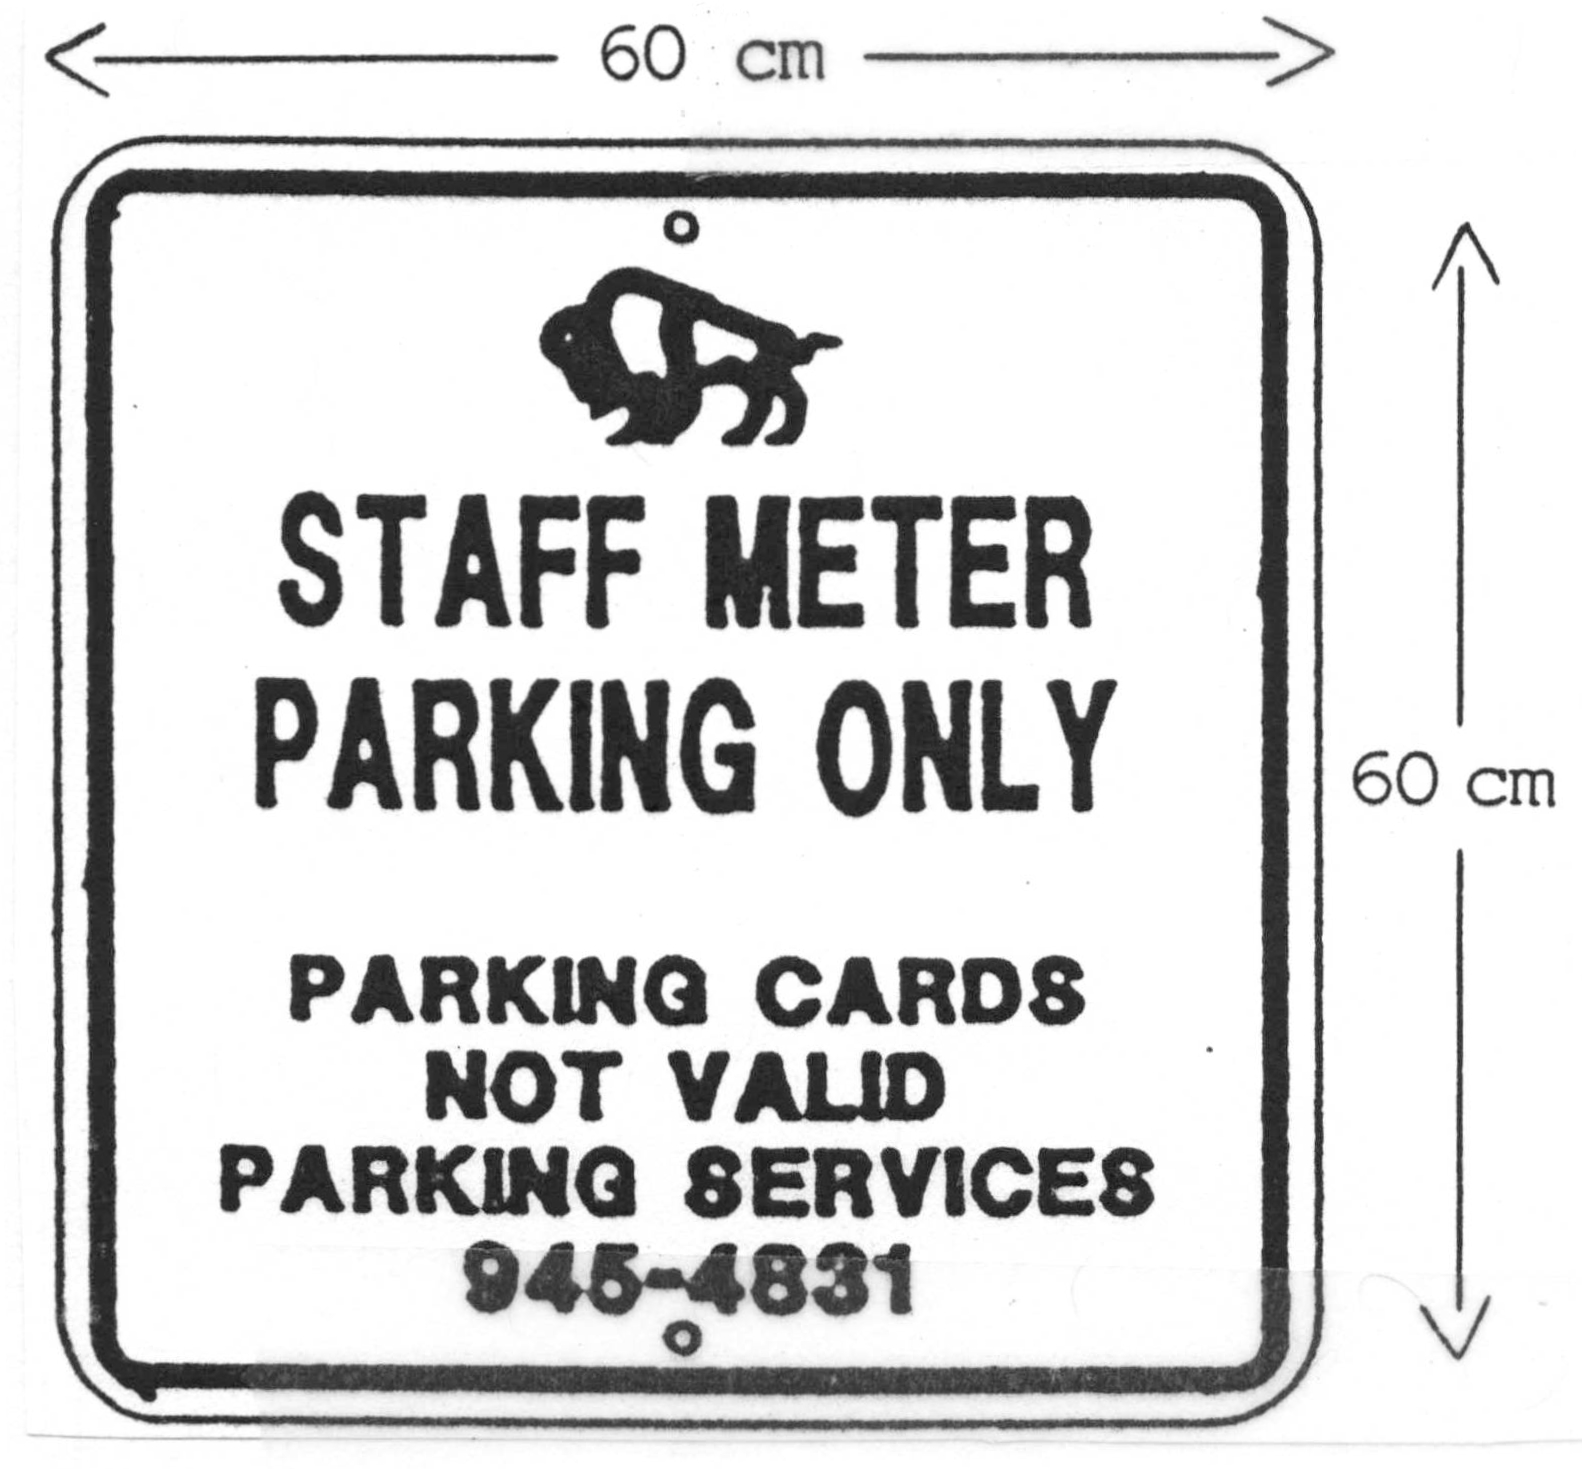 Sign: Staff meter parking only